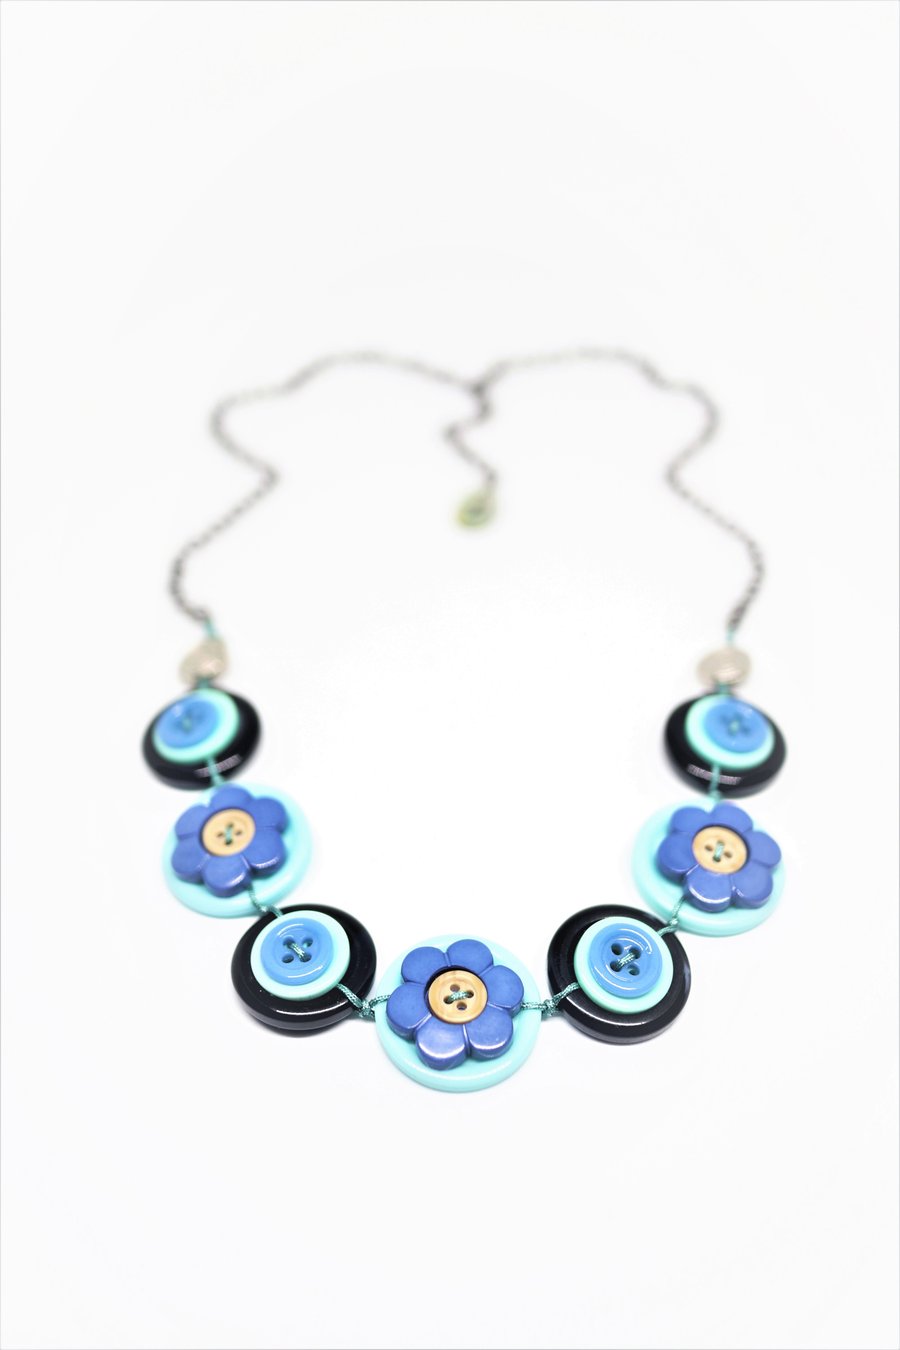 SALE - Navy and baby blue - Vintage Button Handmade Necklace - one off design